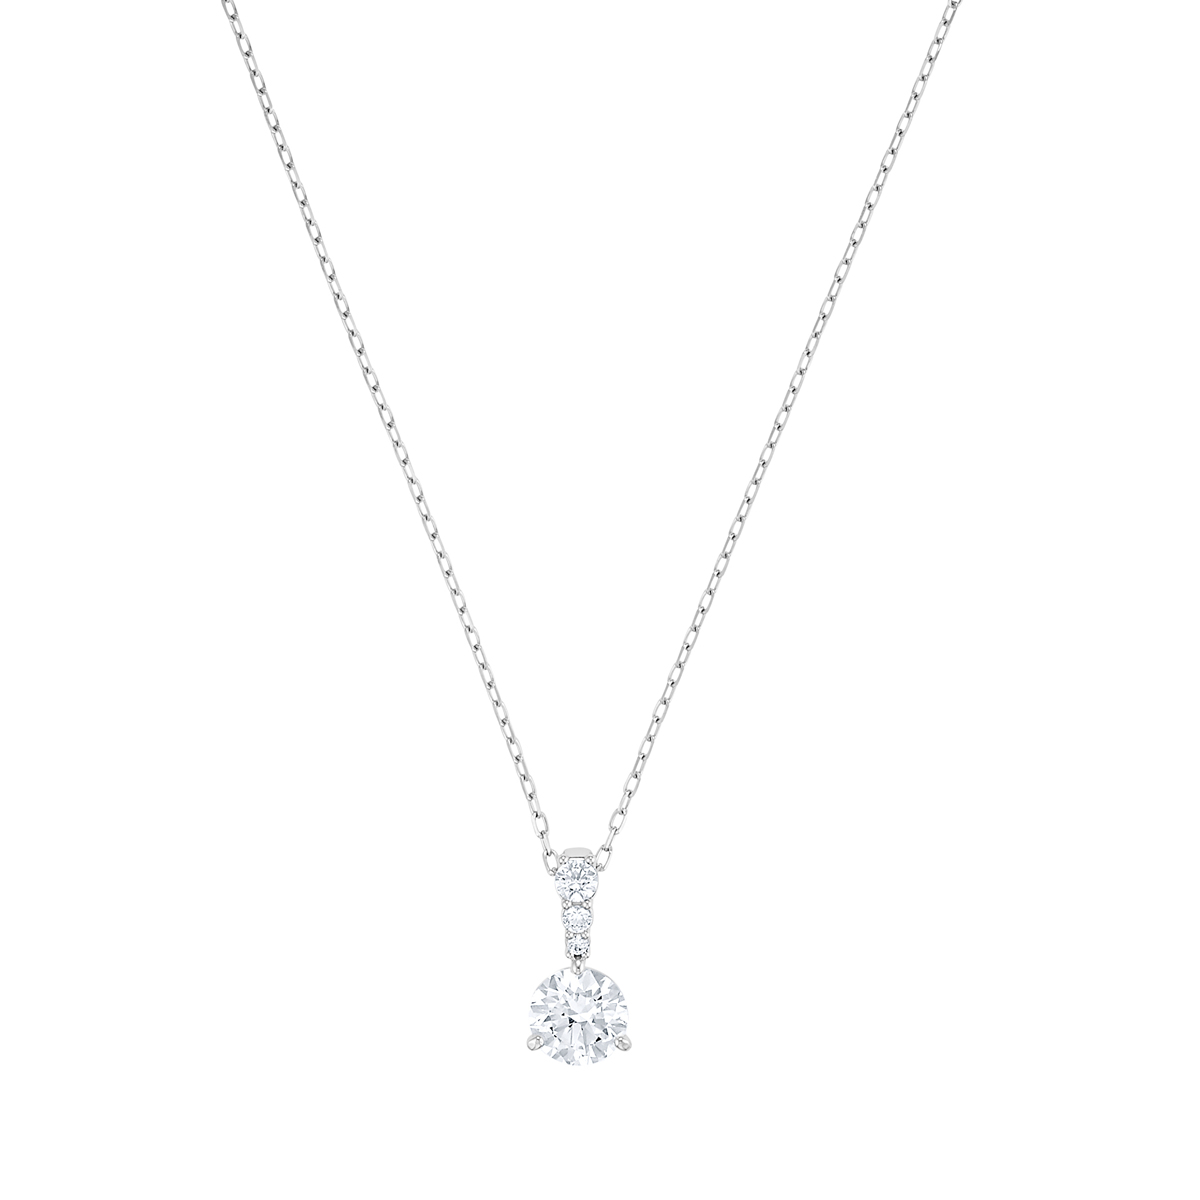 Swarovski Crystal and Rhodium Solitaire Pendant Necklace